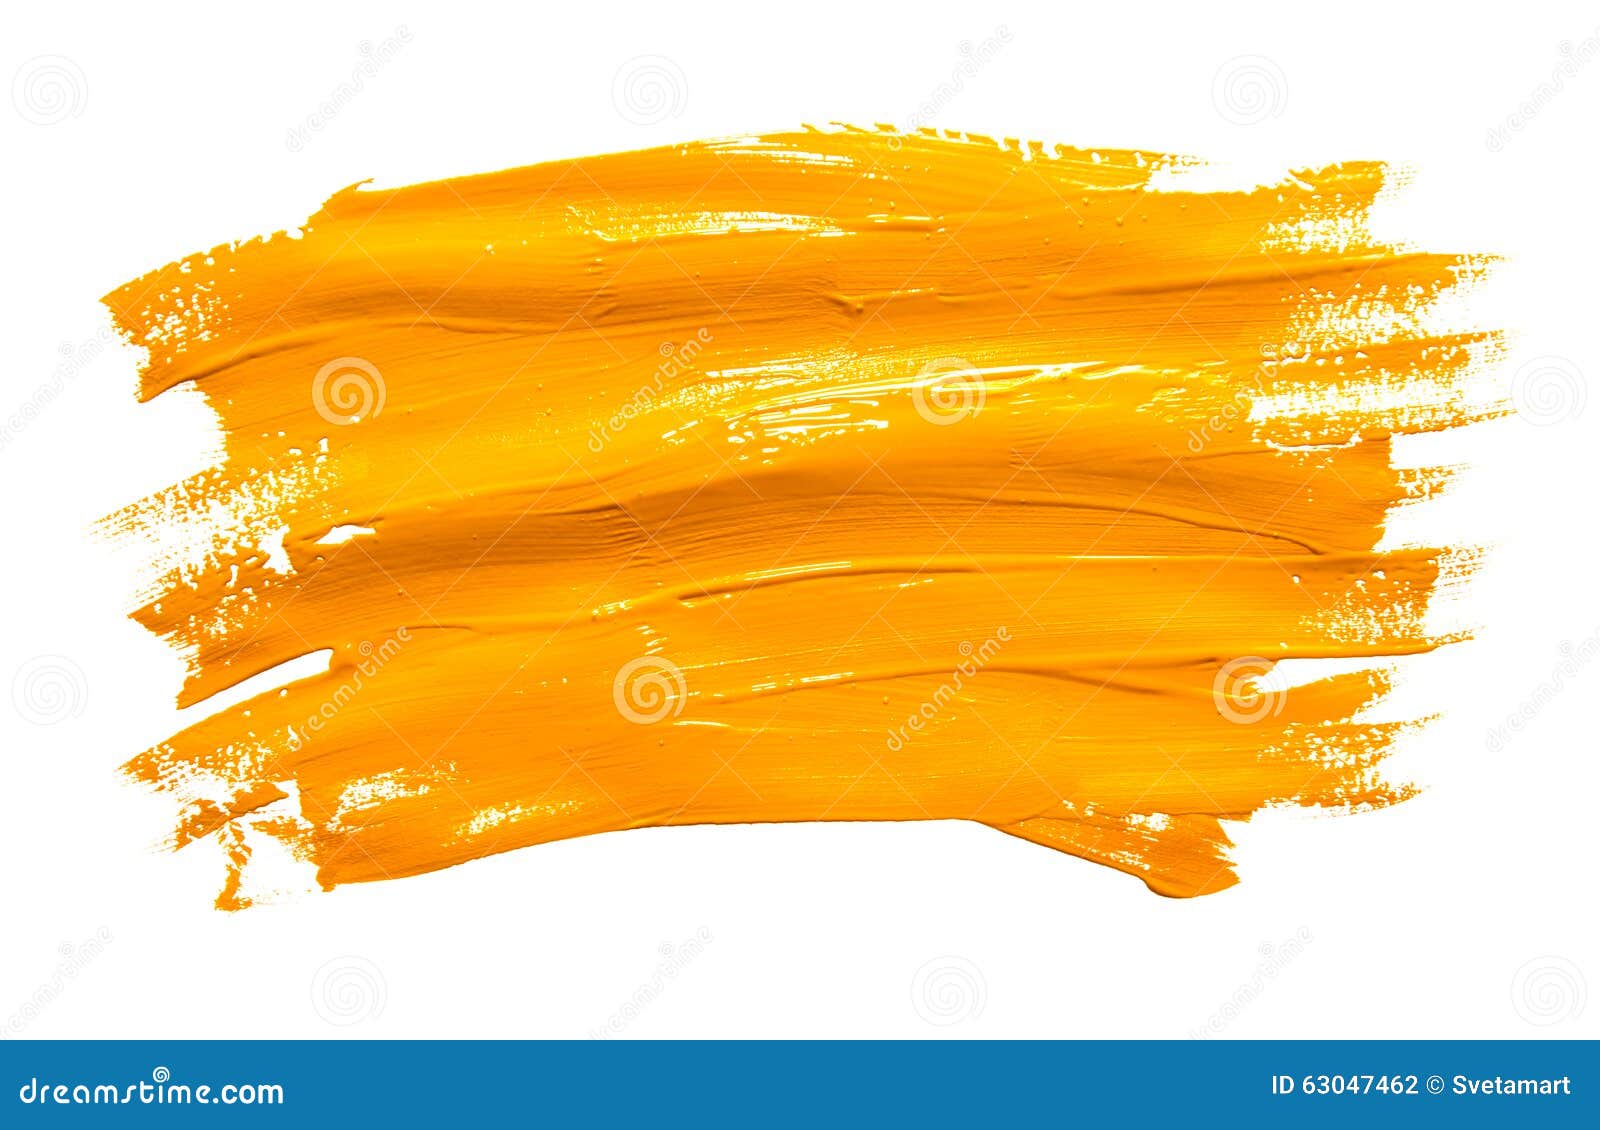 https://thumbs.dreamstime.com/z/paint-brush-stroke-texture-ochre-watercolor-isolated-white-background-63047462.jpg